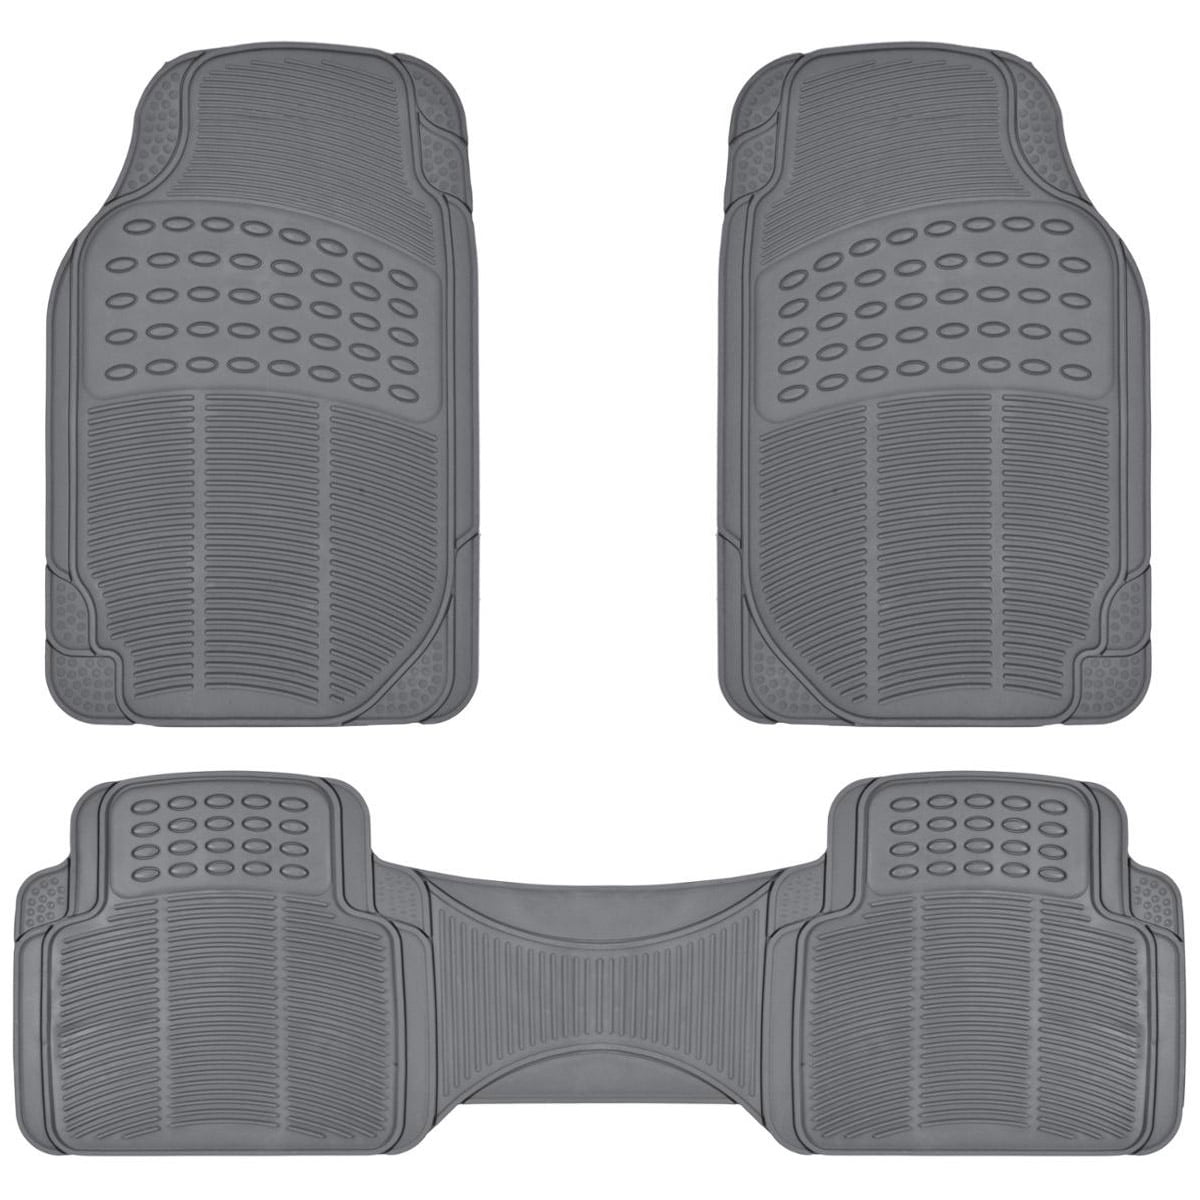 BDK MT654PLUS Heavy Duty 4pc Front & Rear Rubber Floor Mats for Car SUV Van & Truck Black All Weather Protection Universal Fit